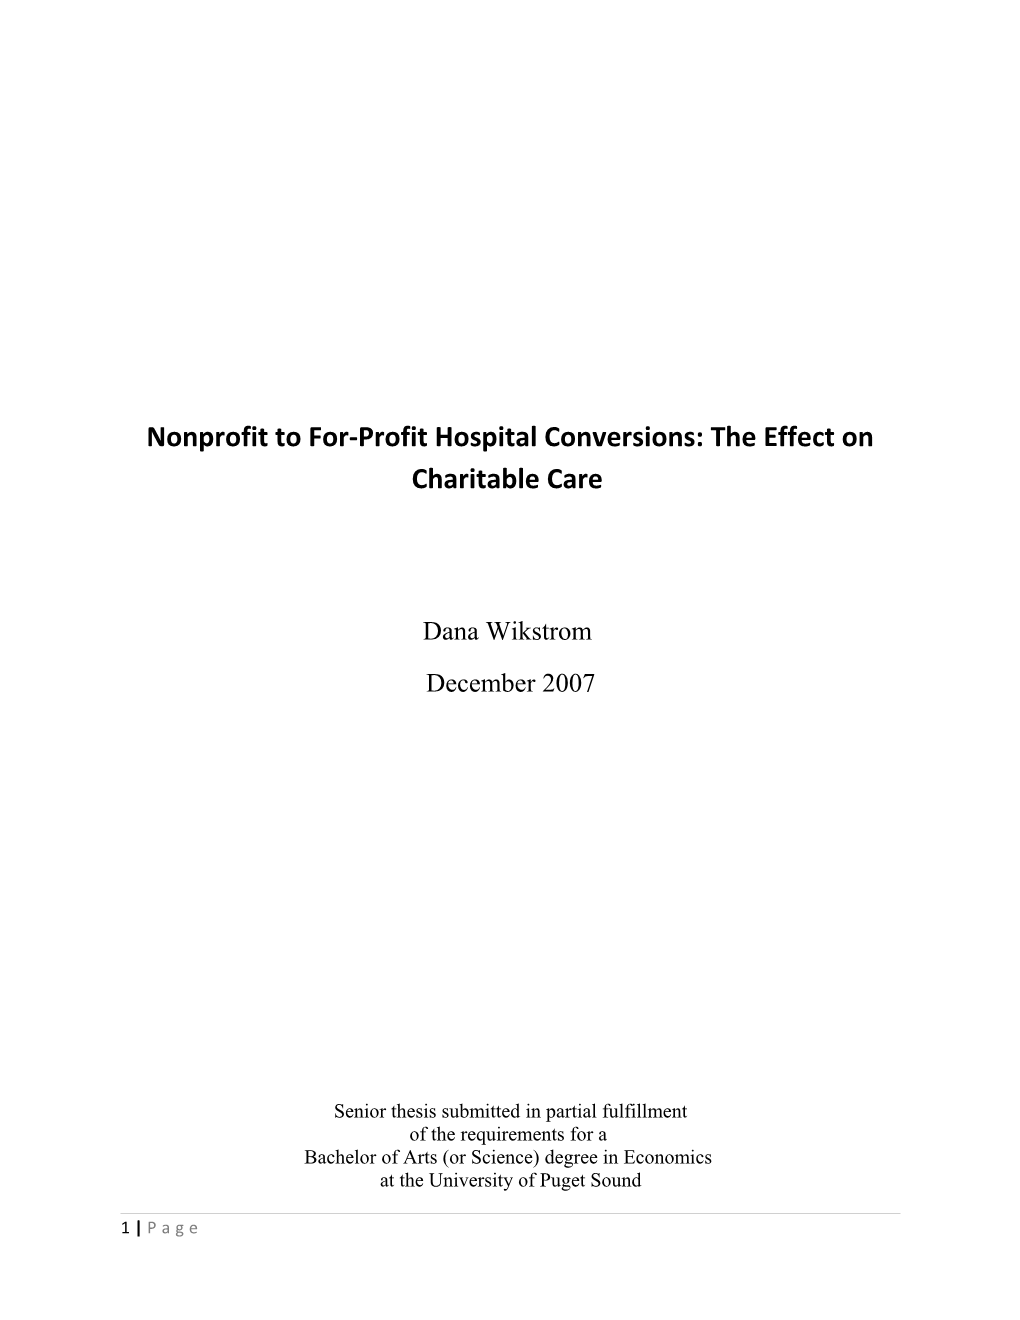 Nonprofit to For-Profit Hospital Conversions: the Effect on Charitable Care